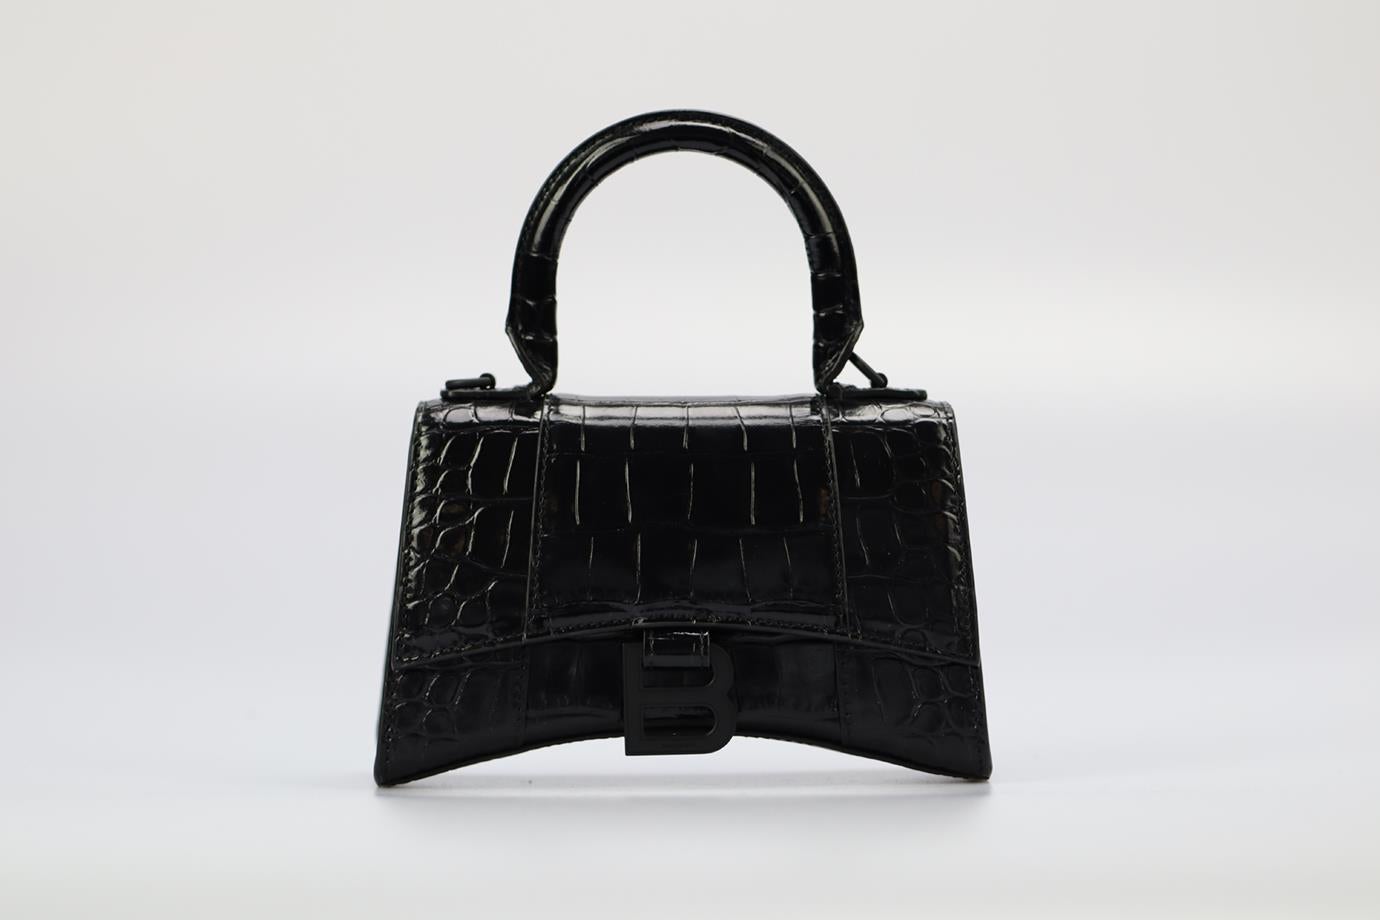 Balenciaga Hourglass Xs Croc Effect Leather Tote Bag. Black. Magnetic fastening - Front. Does not come with - dustbag or box. Height: 5 in. Width: 7.3 in. Depth: 2.7 in. Handle drop: 3 in. Condition: Used. Very good condition - Shoulder strap